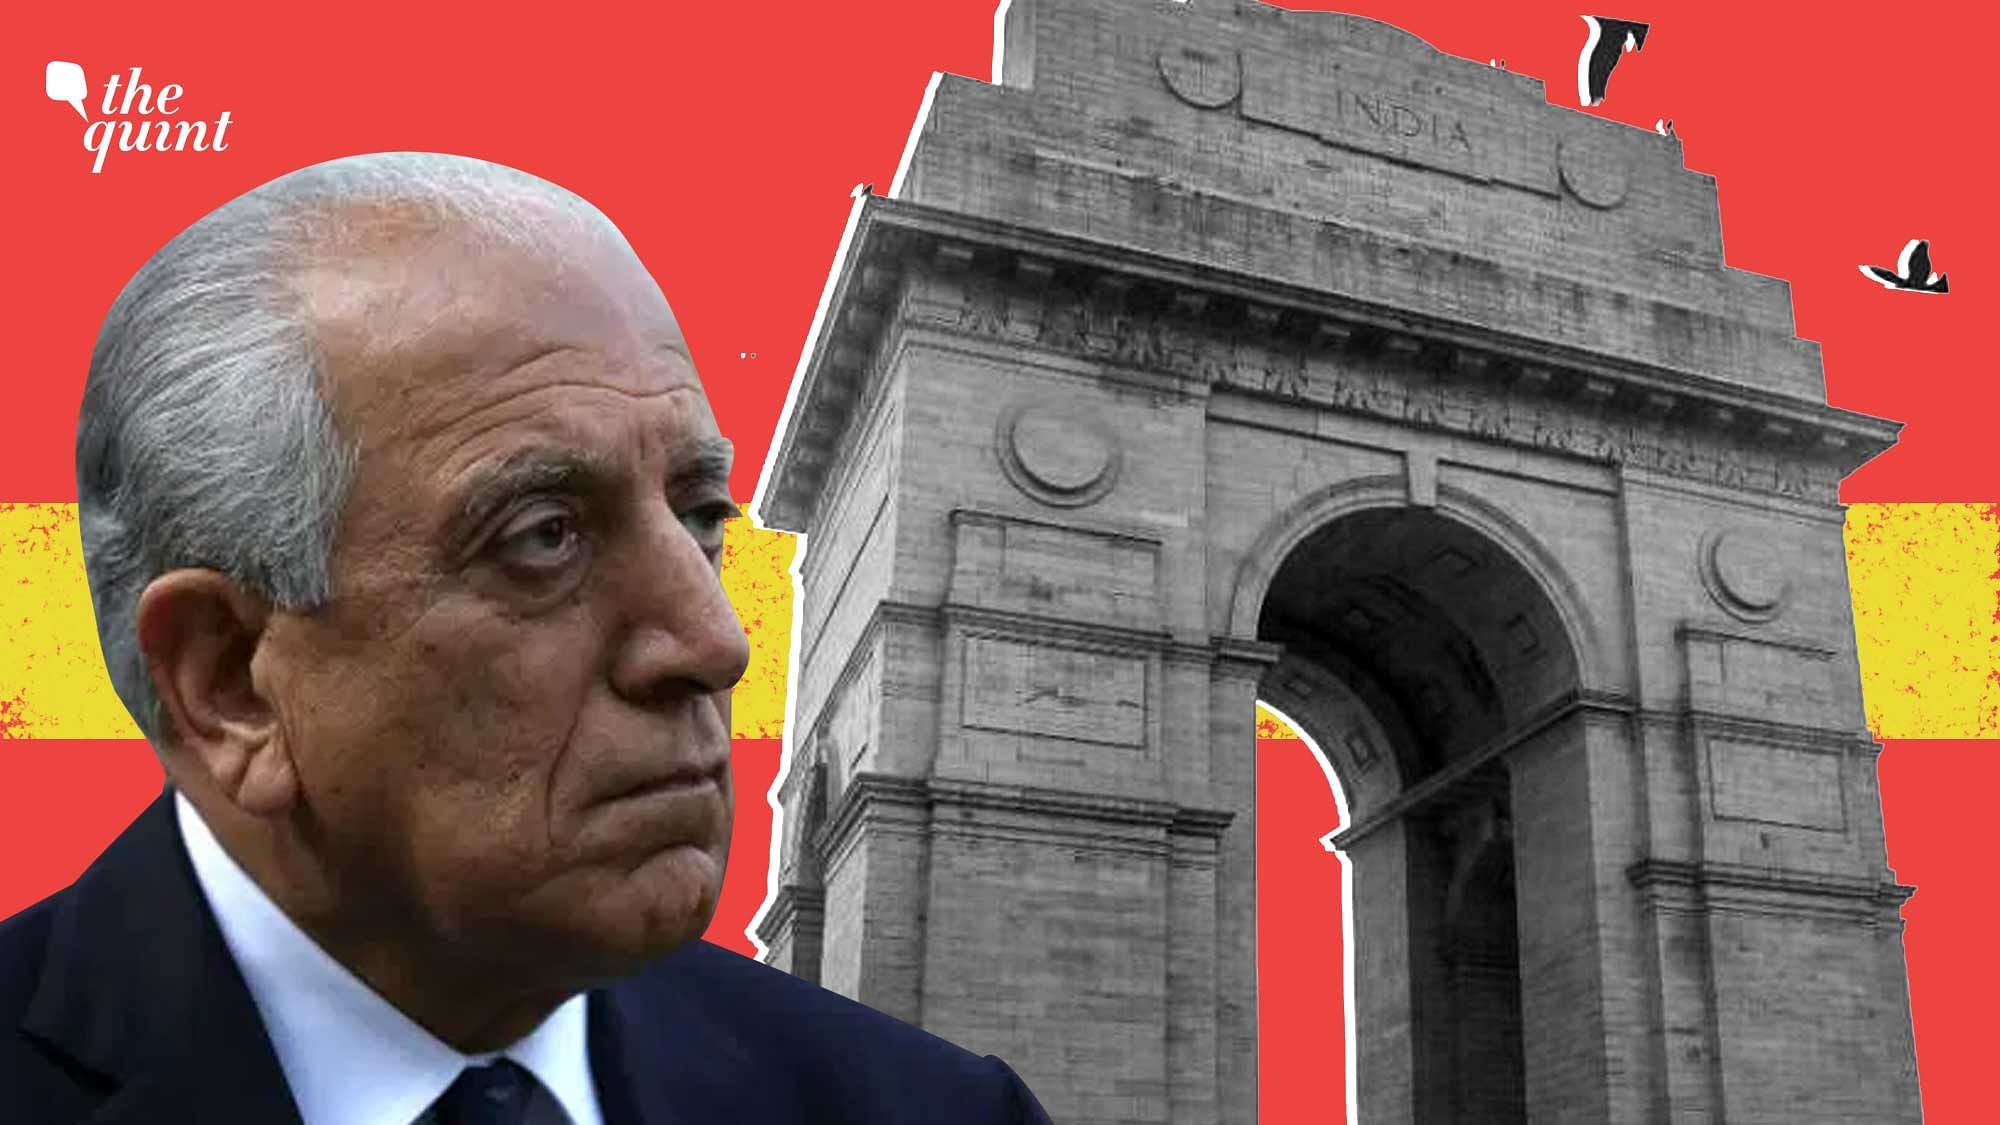 Zalmay Khalilzad’s latest visit can only be seen as a formality of keeping the region’s largest power in loop over the US’s planned military withdrawal from Afghanistan.